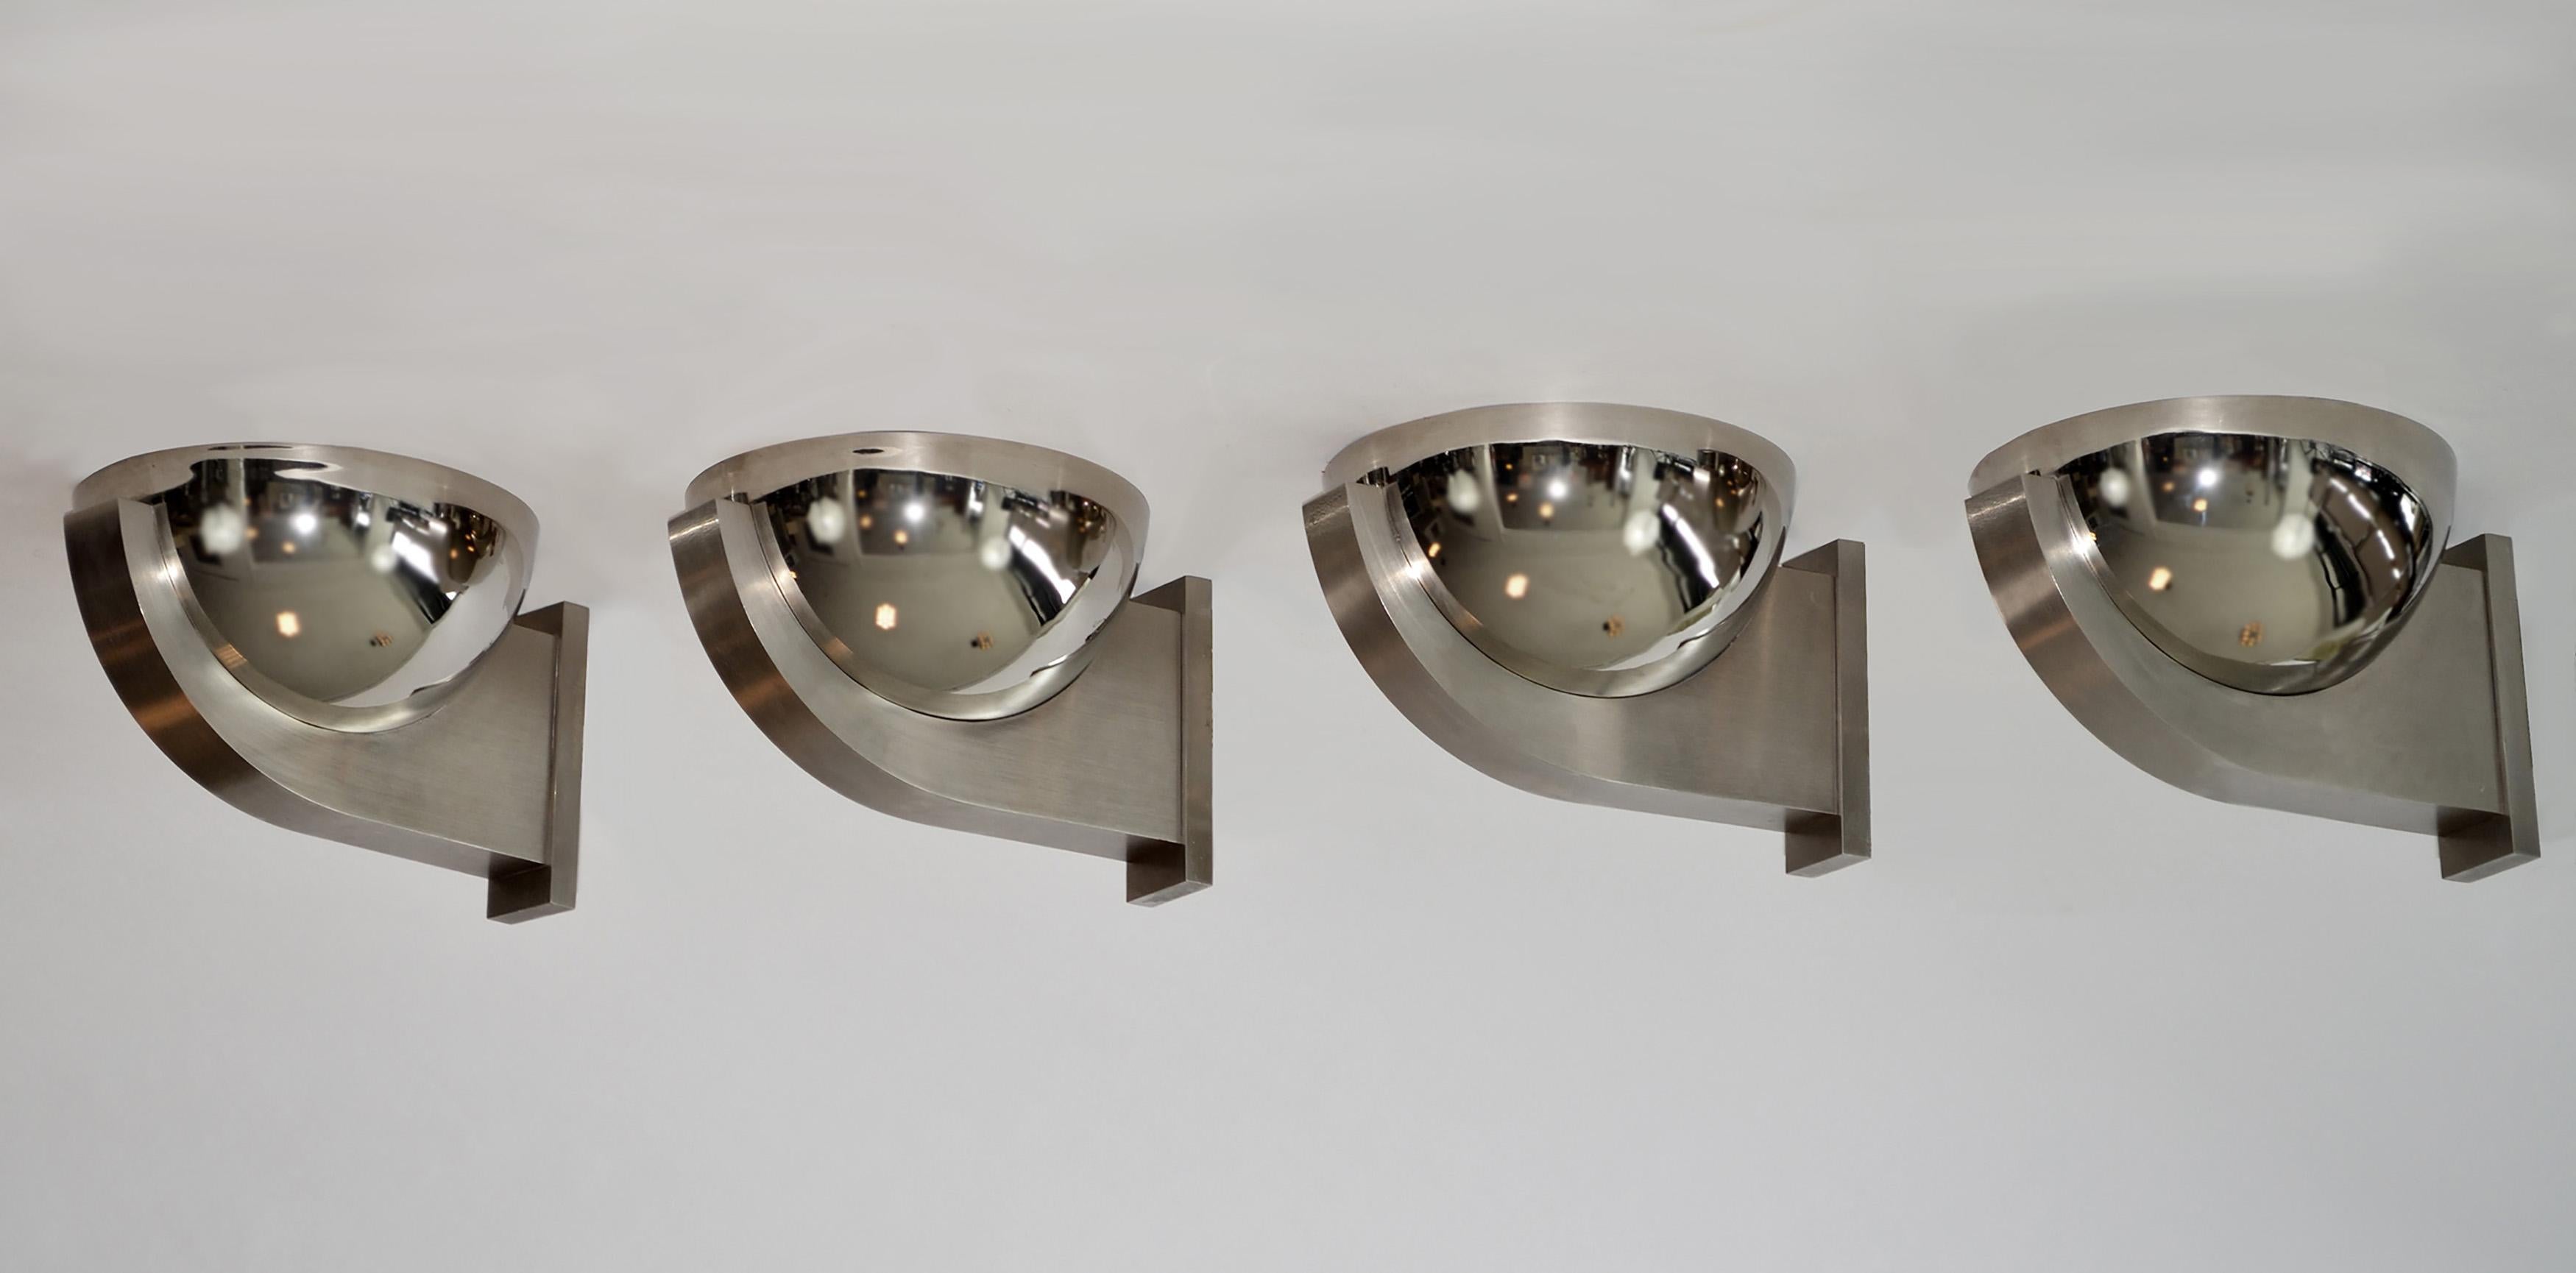 Four Wall Sconces Machine Age Deco Bauhaus Springer Sally Sirkin Lewis
Four Metal Sconces Machine Age Art Deco Bauhaus Springer Perzel Style 
Mirrored chrome over brass and brushed aluminum construction. In the manner of Jean Perzel or Karl